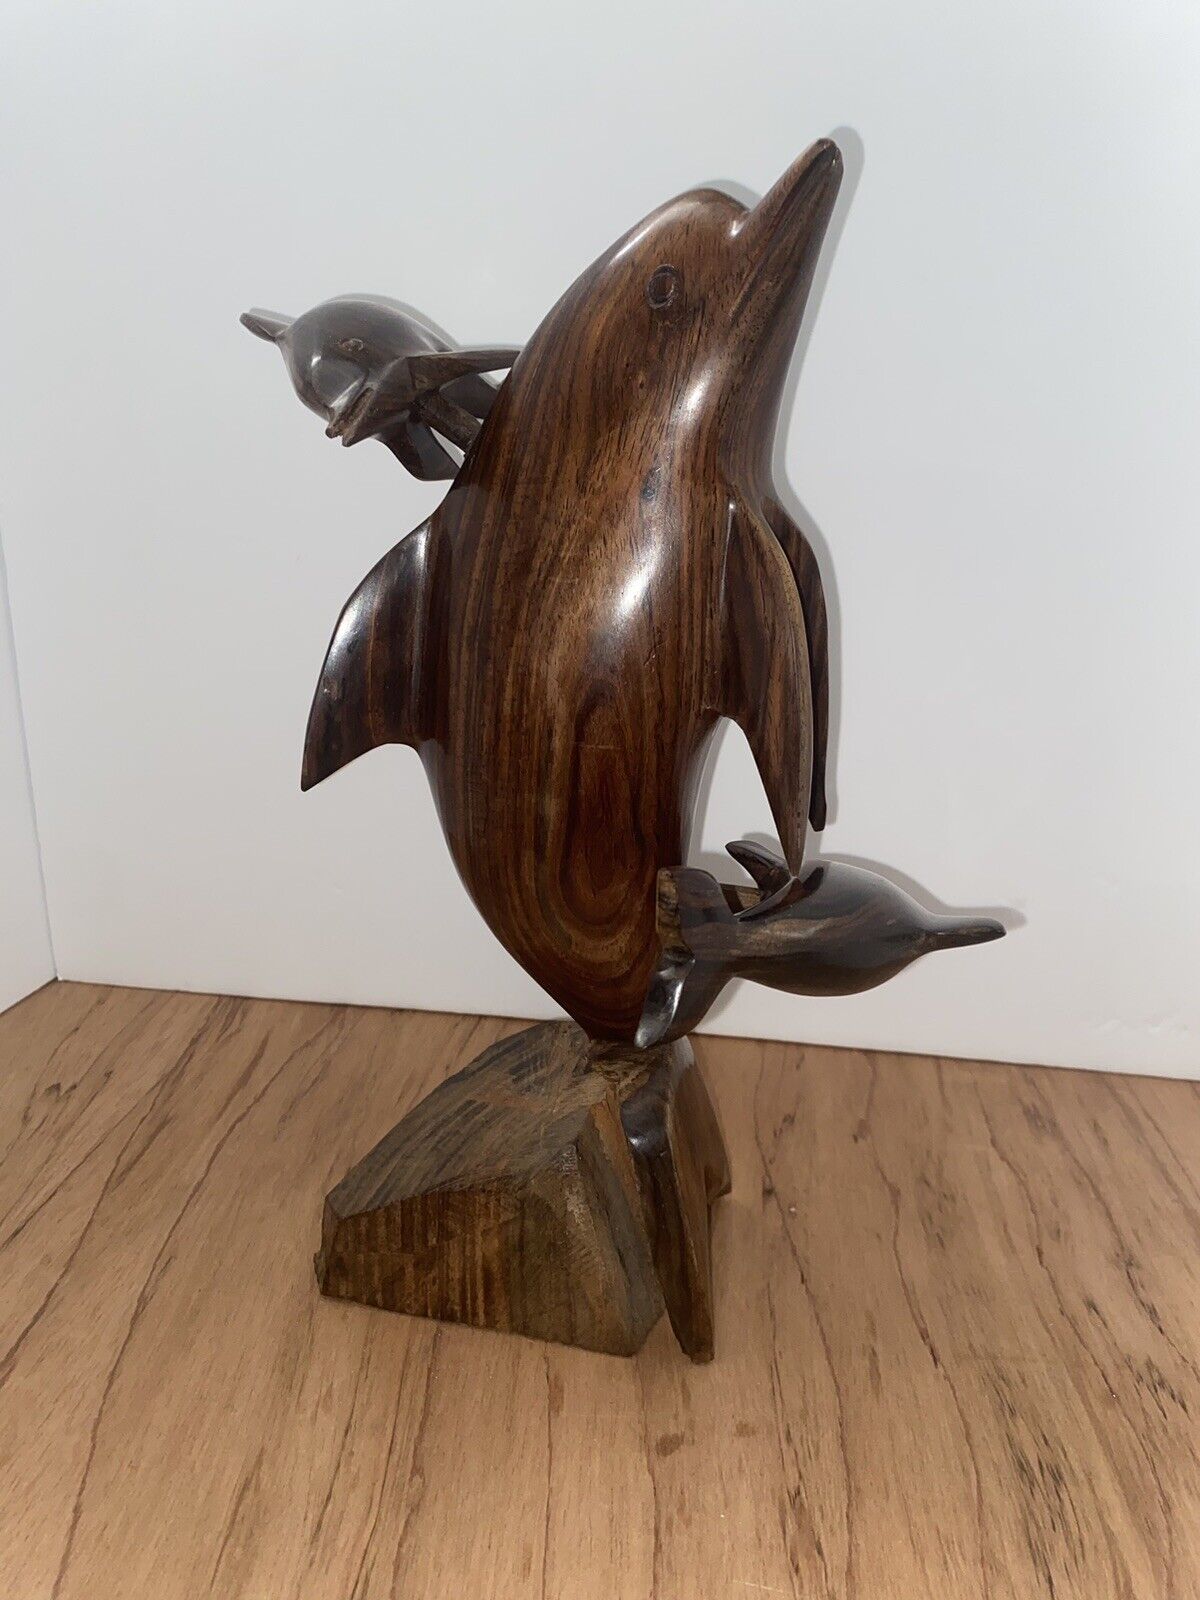 Large Ironwood 3 Dolphin 12” Hand Carved Wooden Sculpture Figurine Desk decor